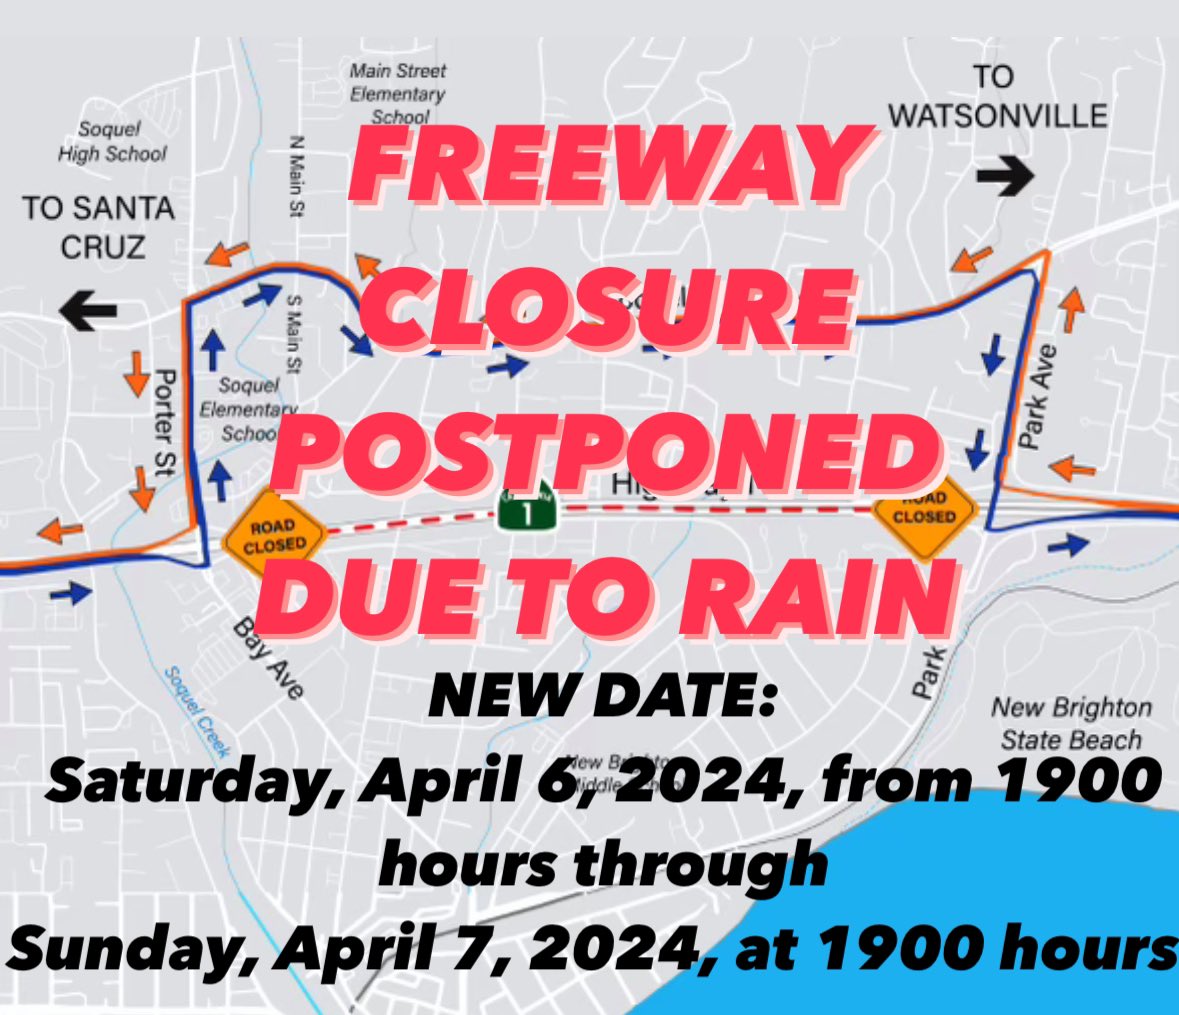 🚧🚧The full freeway closure on Highway 1 originally planned for this weekend has been postponed due to rain. The new dates are set for Saturday, April 6, 2024, from 1900 hours until Sunday, April 7, 2024, at 1900 hours.